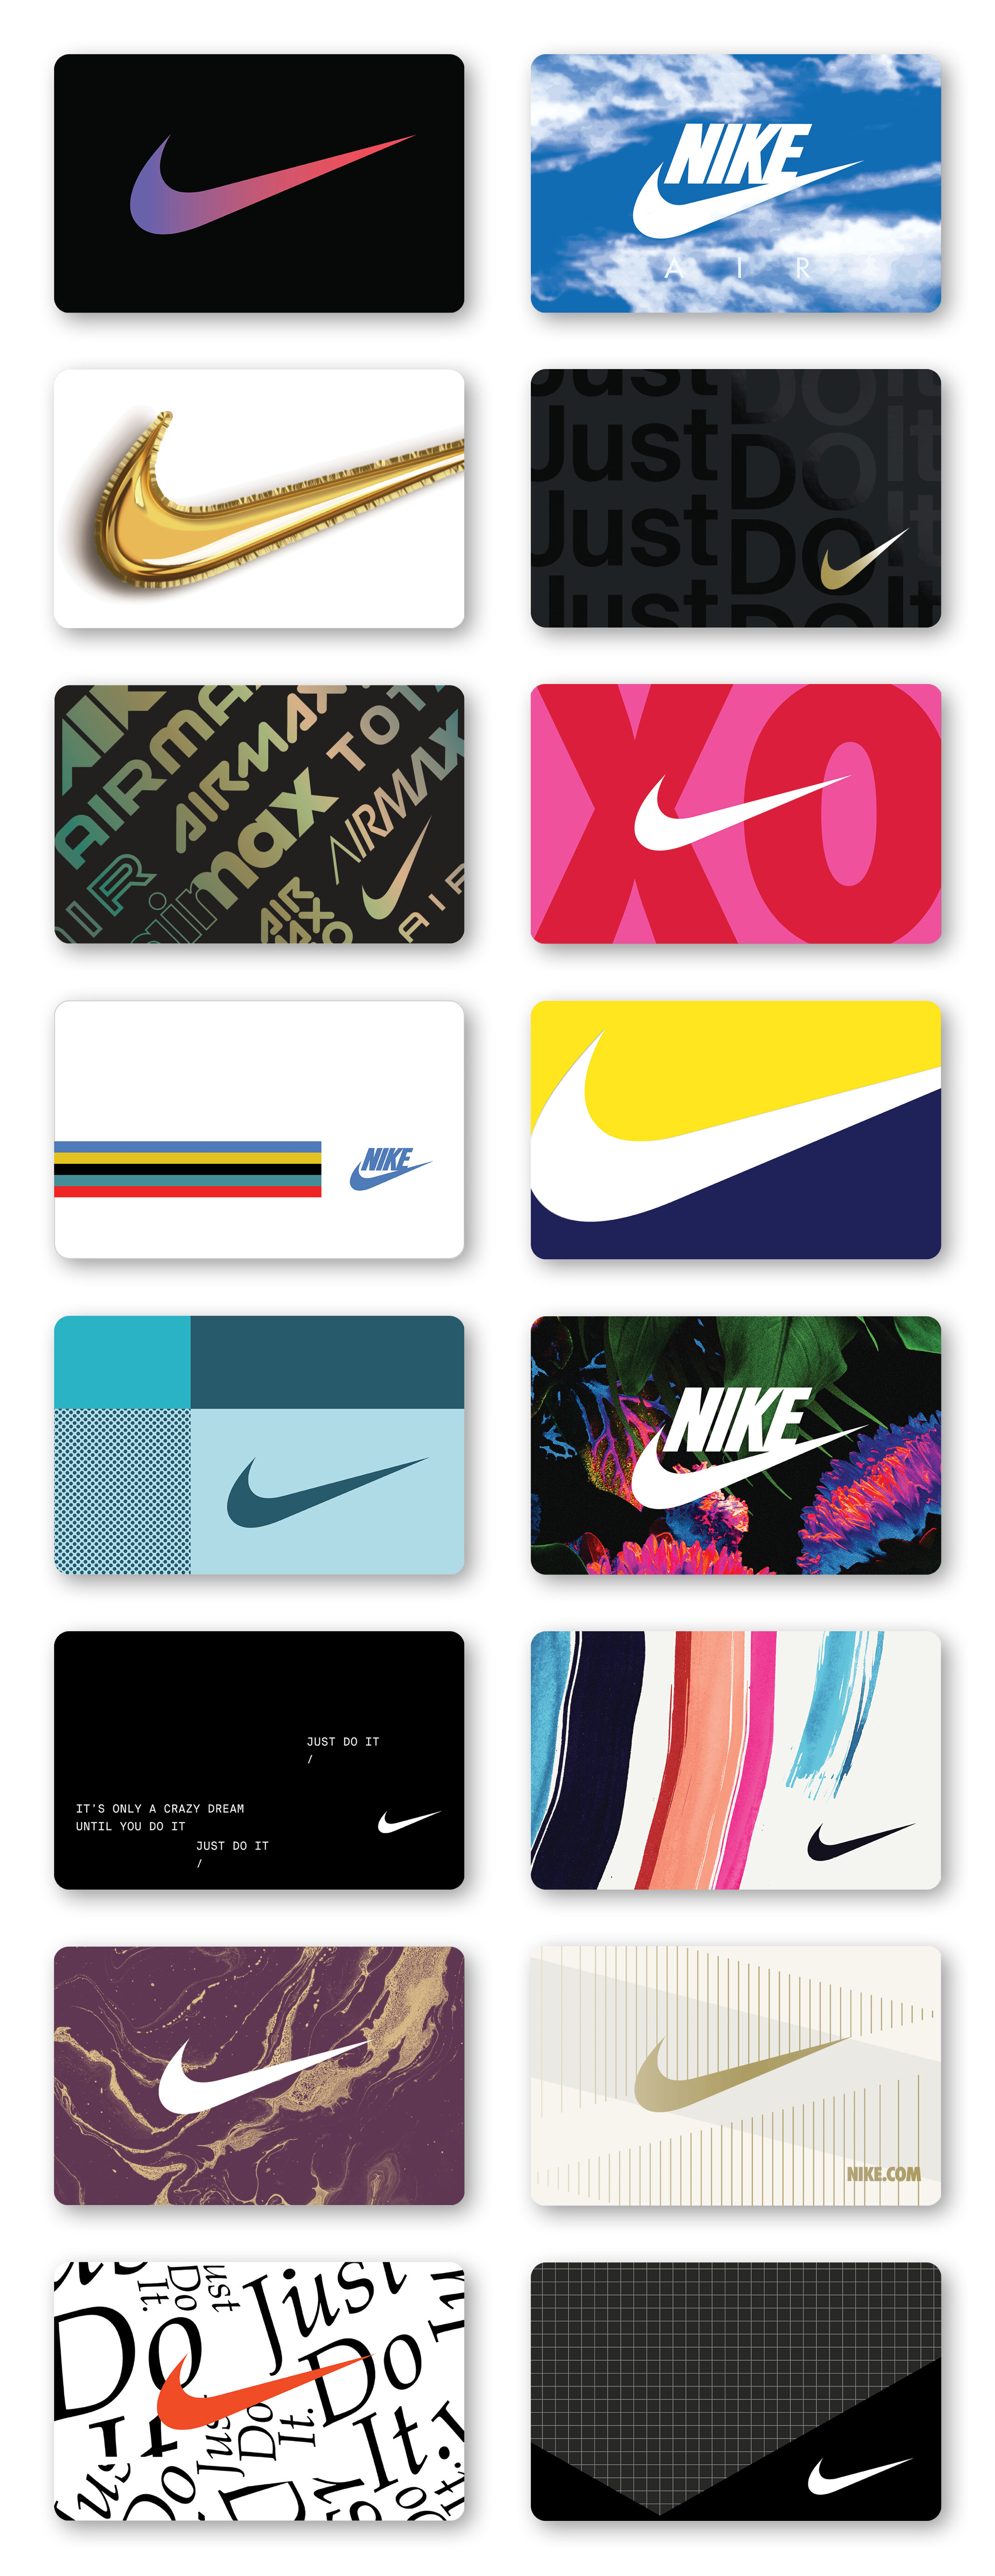 nike just do cards